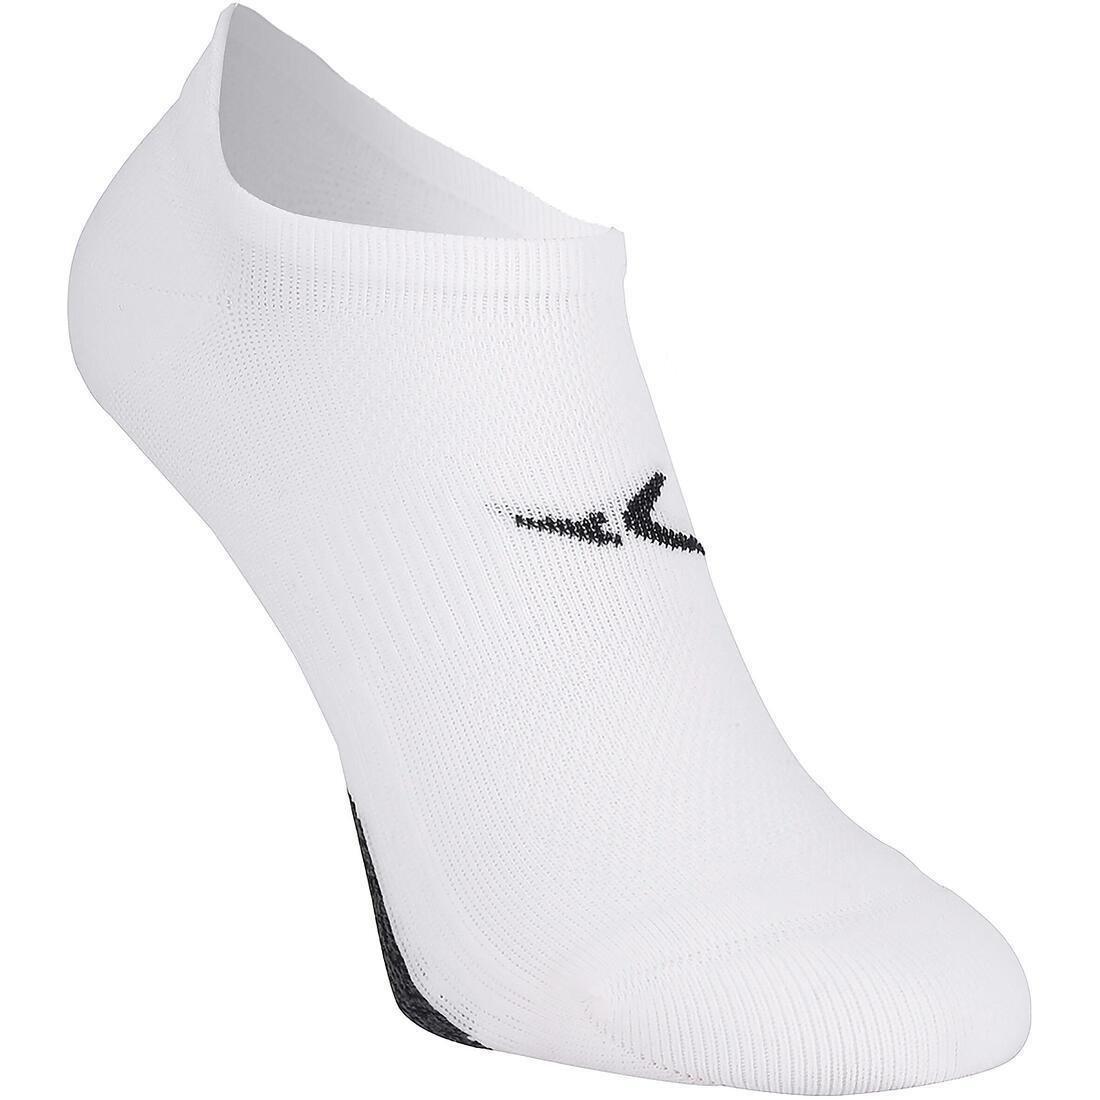 DOMYOS - Invisible Fitness Cardio Training Socks Twin-Pack-White